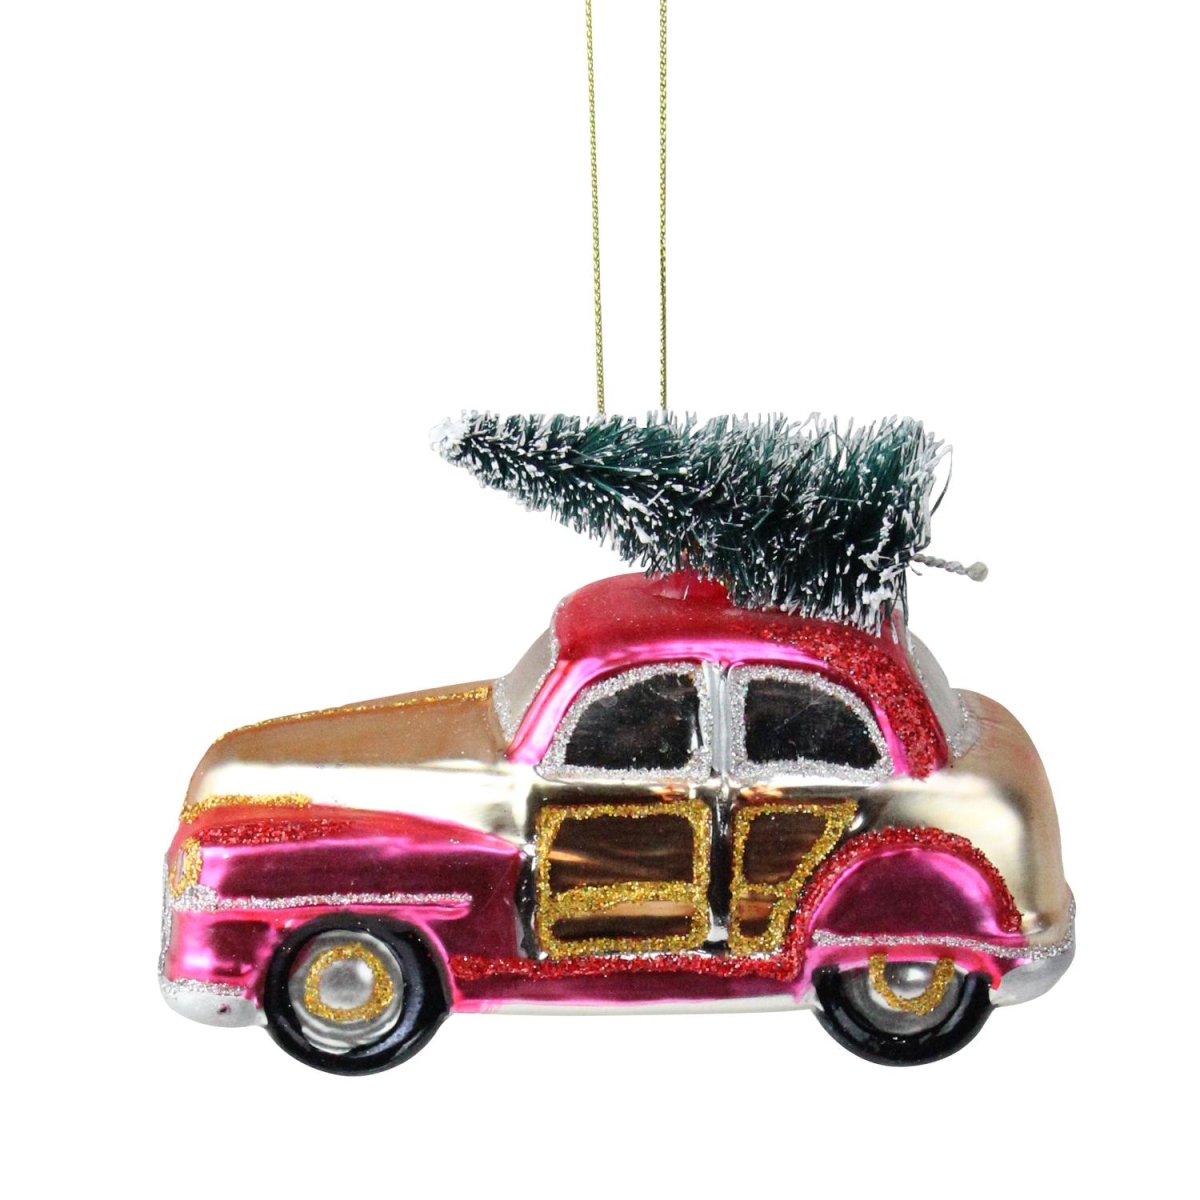 32803058 4.75 In. Festive Glittered Car With Christmas Tree On Top Glass Christmas Ornament